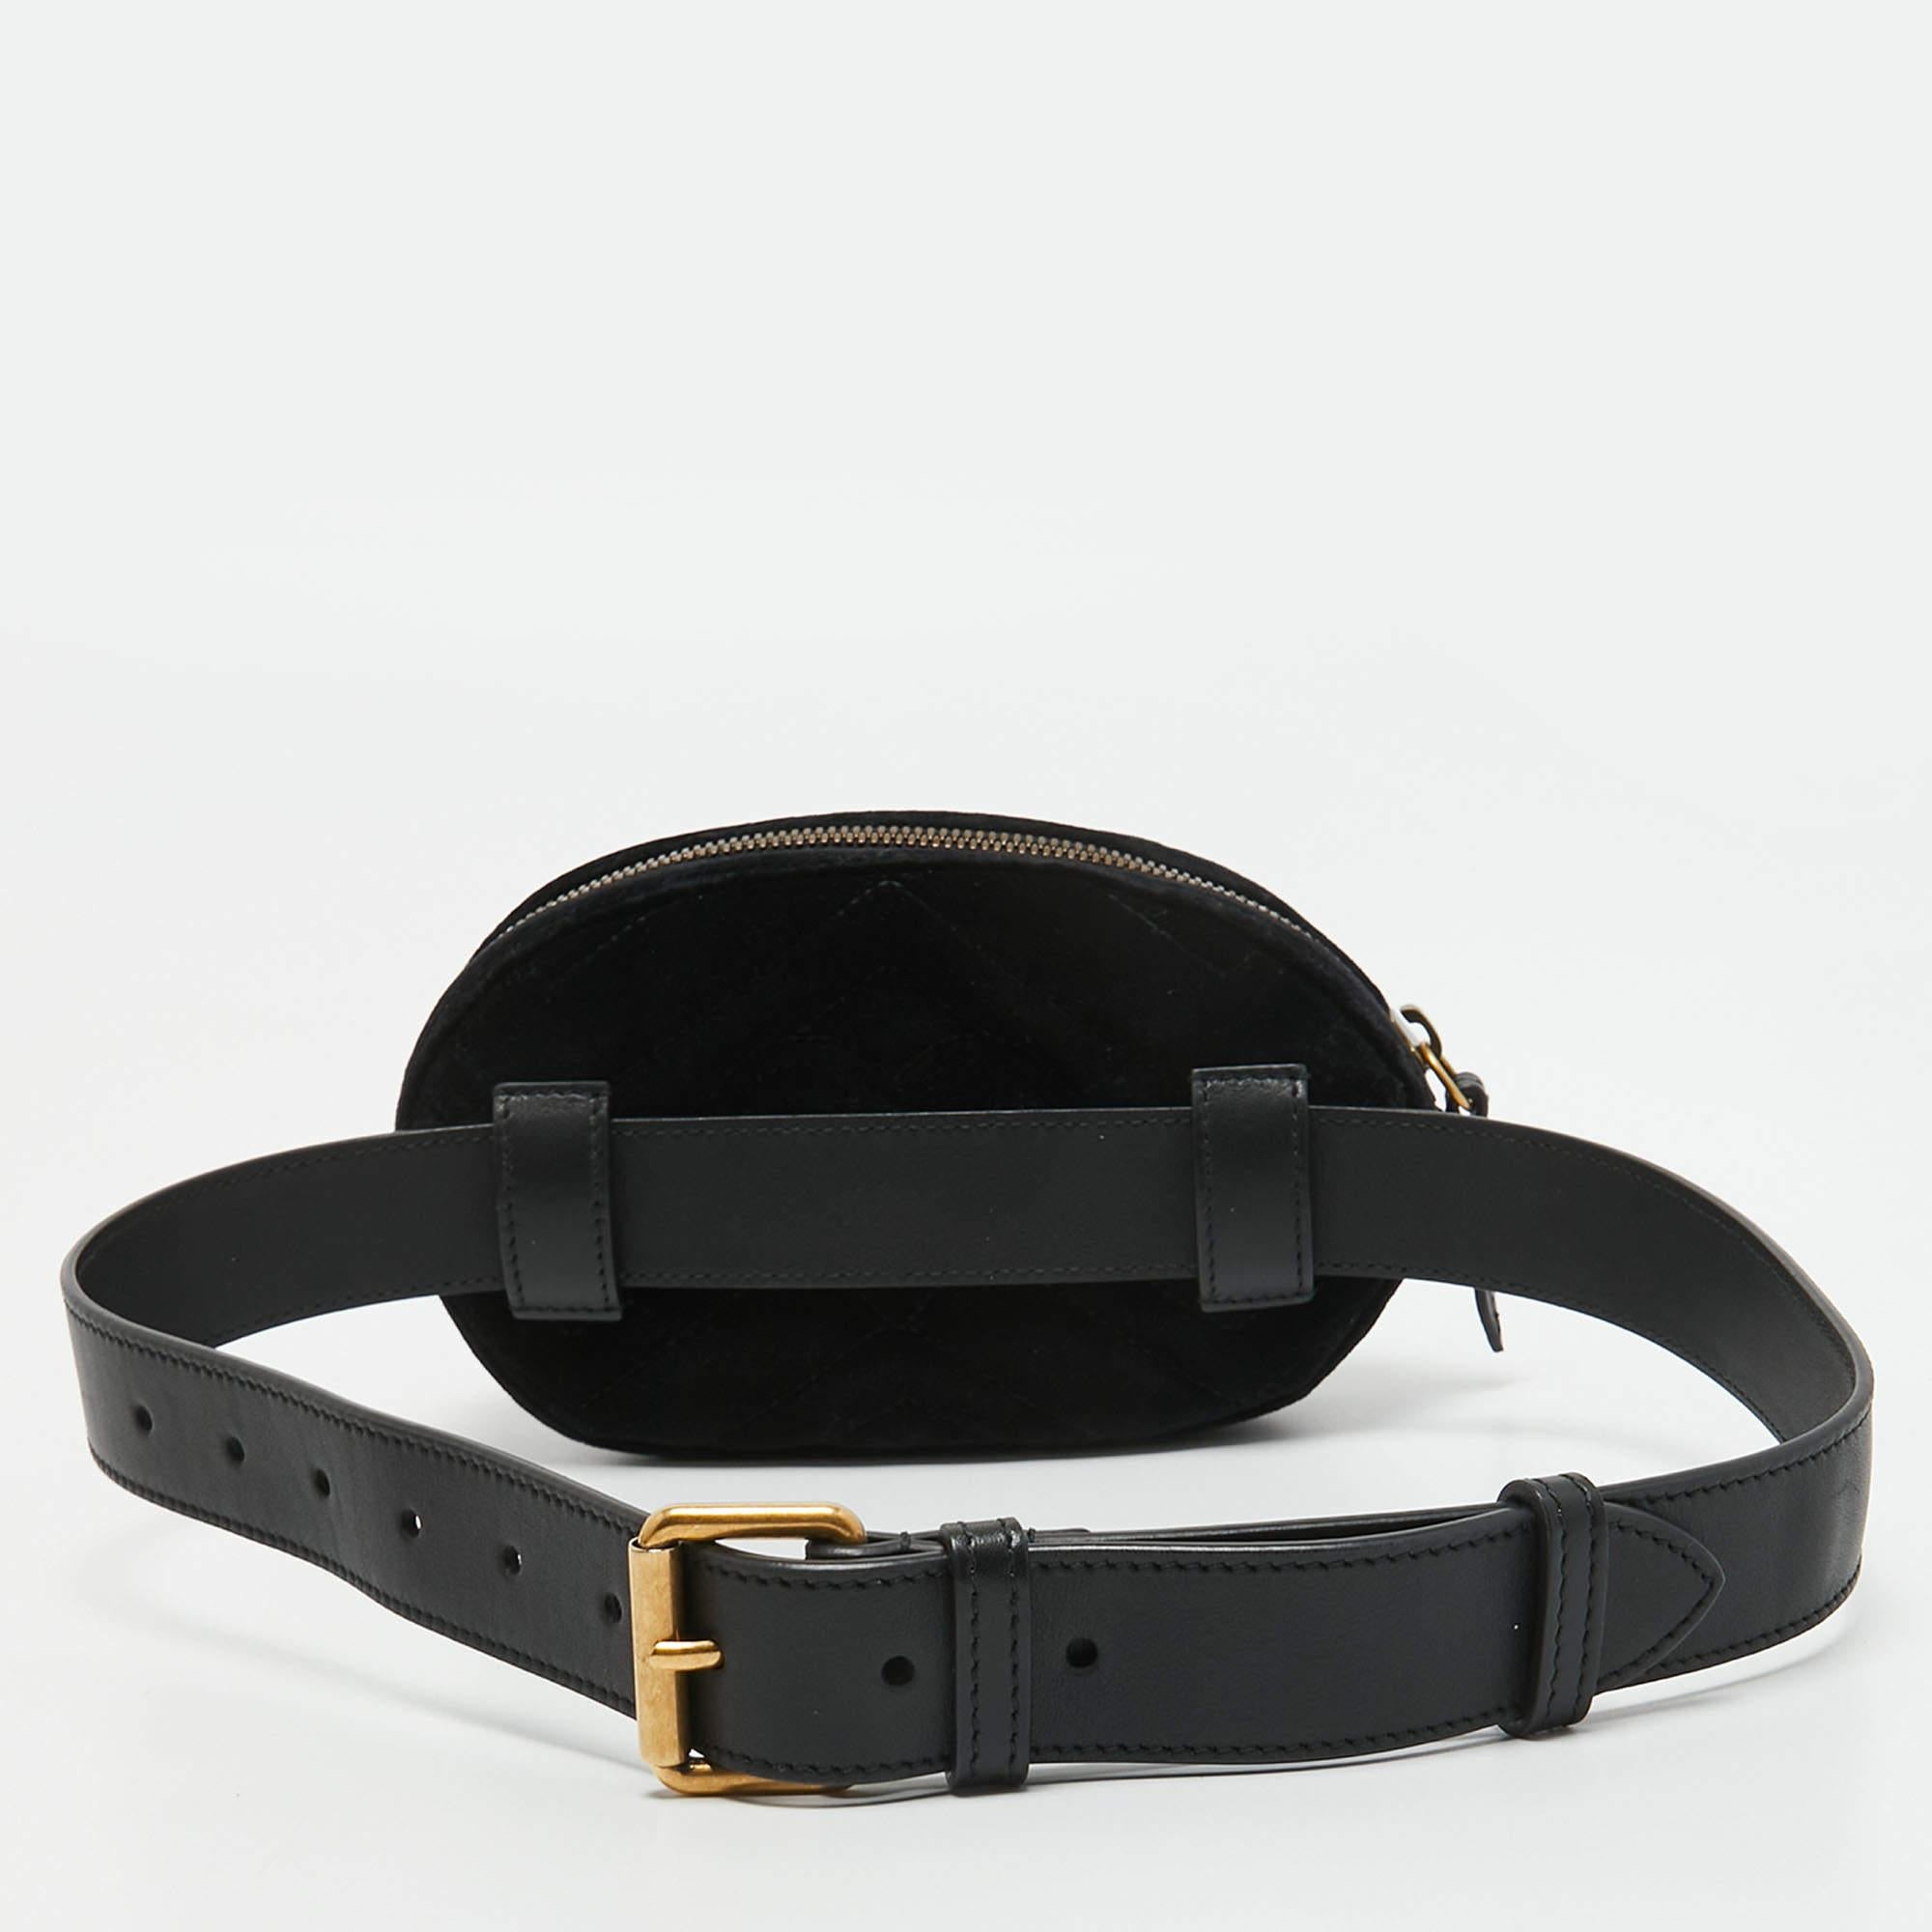 Innovative and sophisticated, this Gucci Marmont belt bag evokes a sense of classic glamour. Finely crafted from matelassé velvet, it gets a luxe update with a 'GG' motif on the front and features a satin-lined interior.

